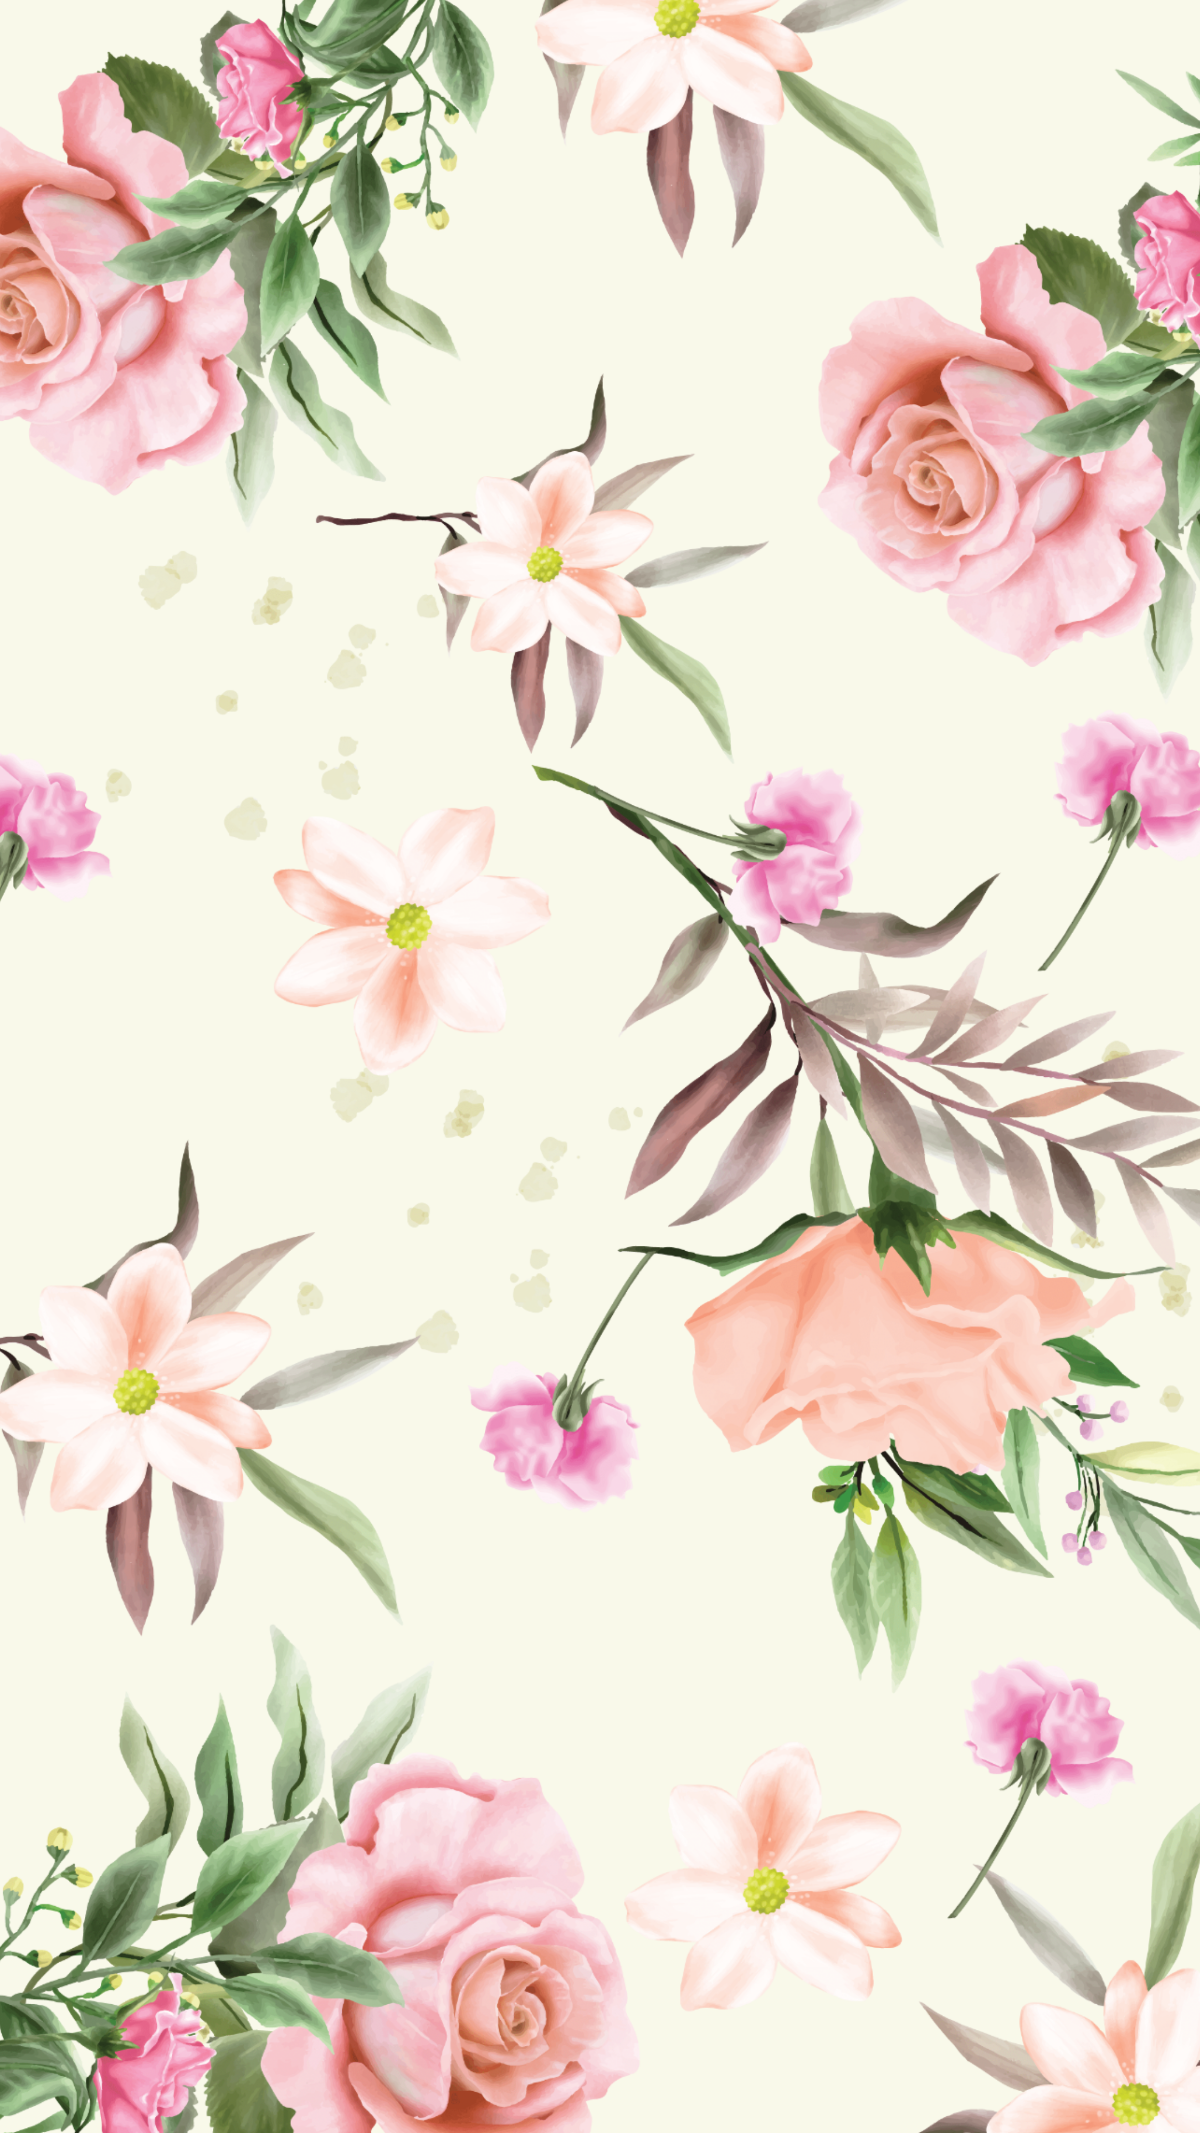 Watercolor Wedding Flower Mobile Background Template